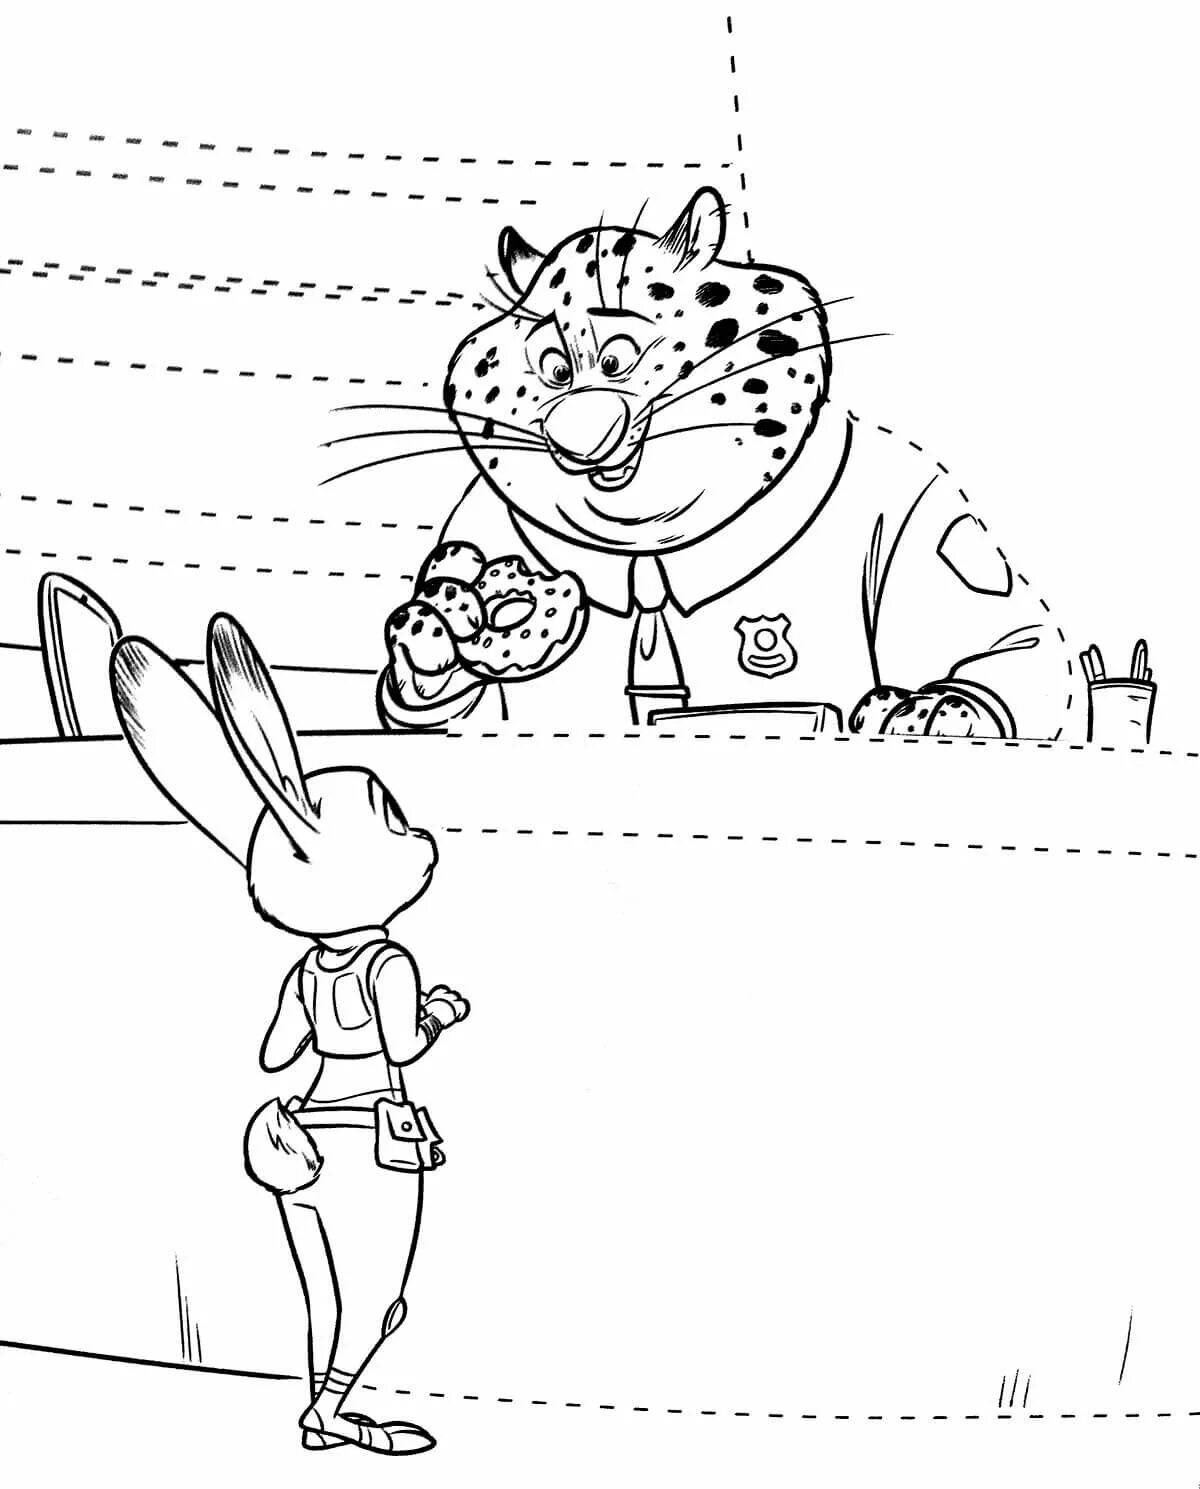 Judy hopps awesome coloring book